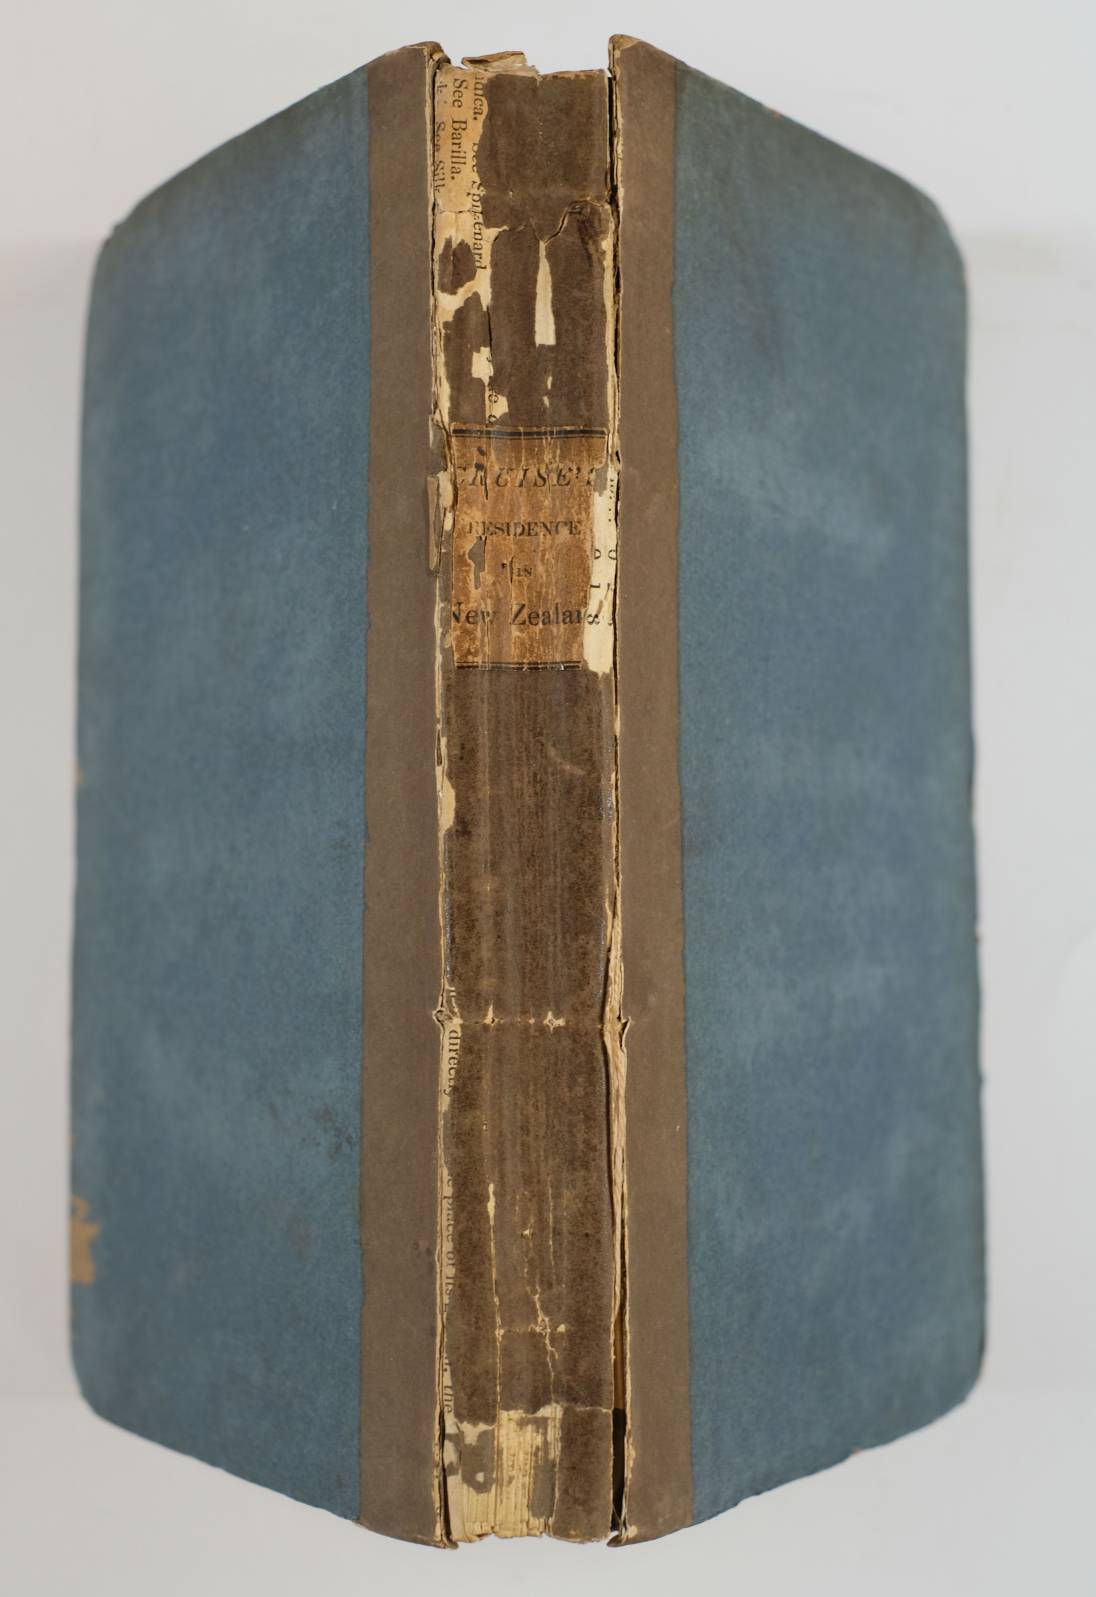 Cruise (Richard A.). Journal of a Ten Months' Residence in New Zealand, 1st edition, 1823, hand- - Image 2 of 5